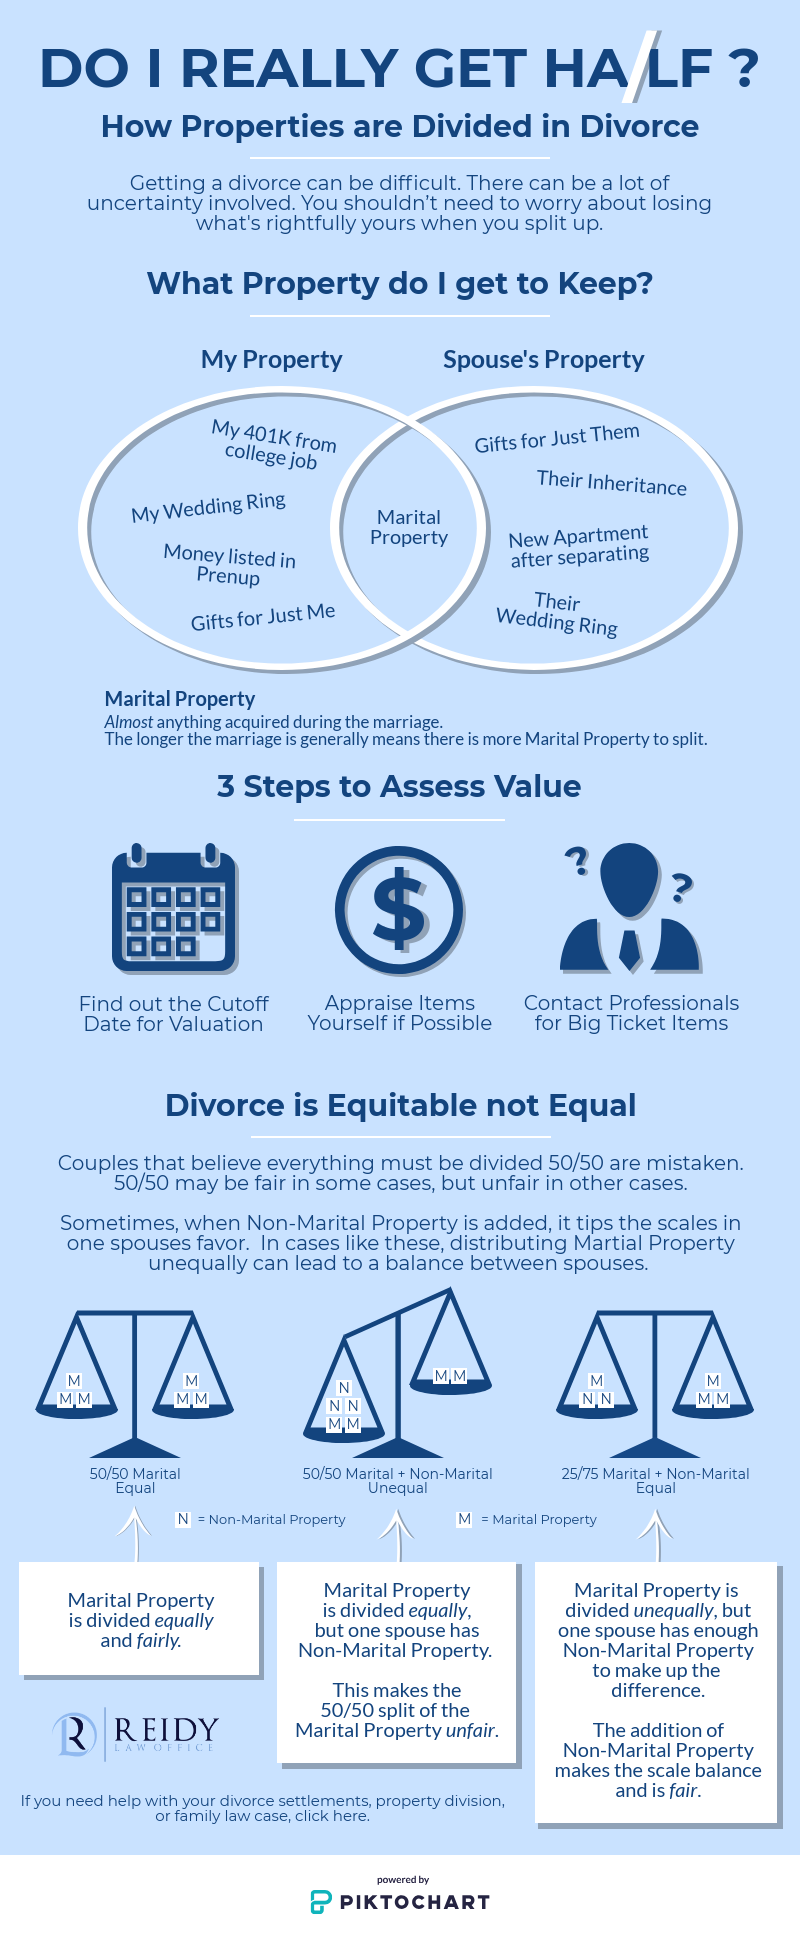 Do I Really Get Half? - How Properties are Divided in Divorce